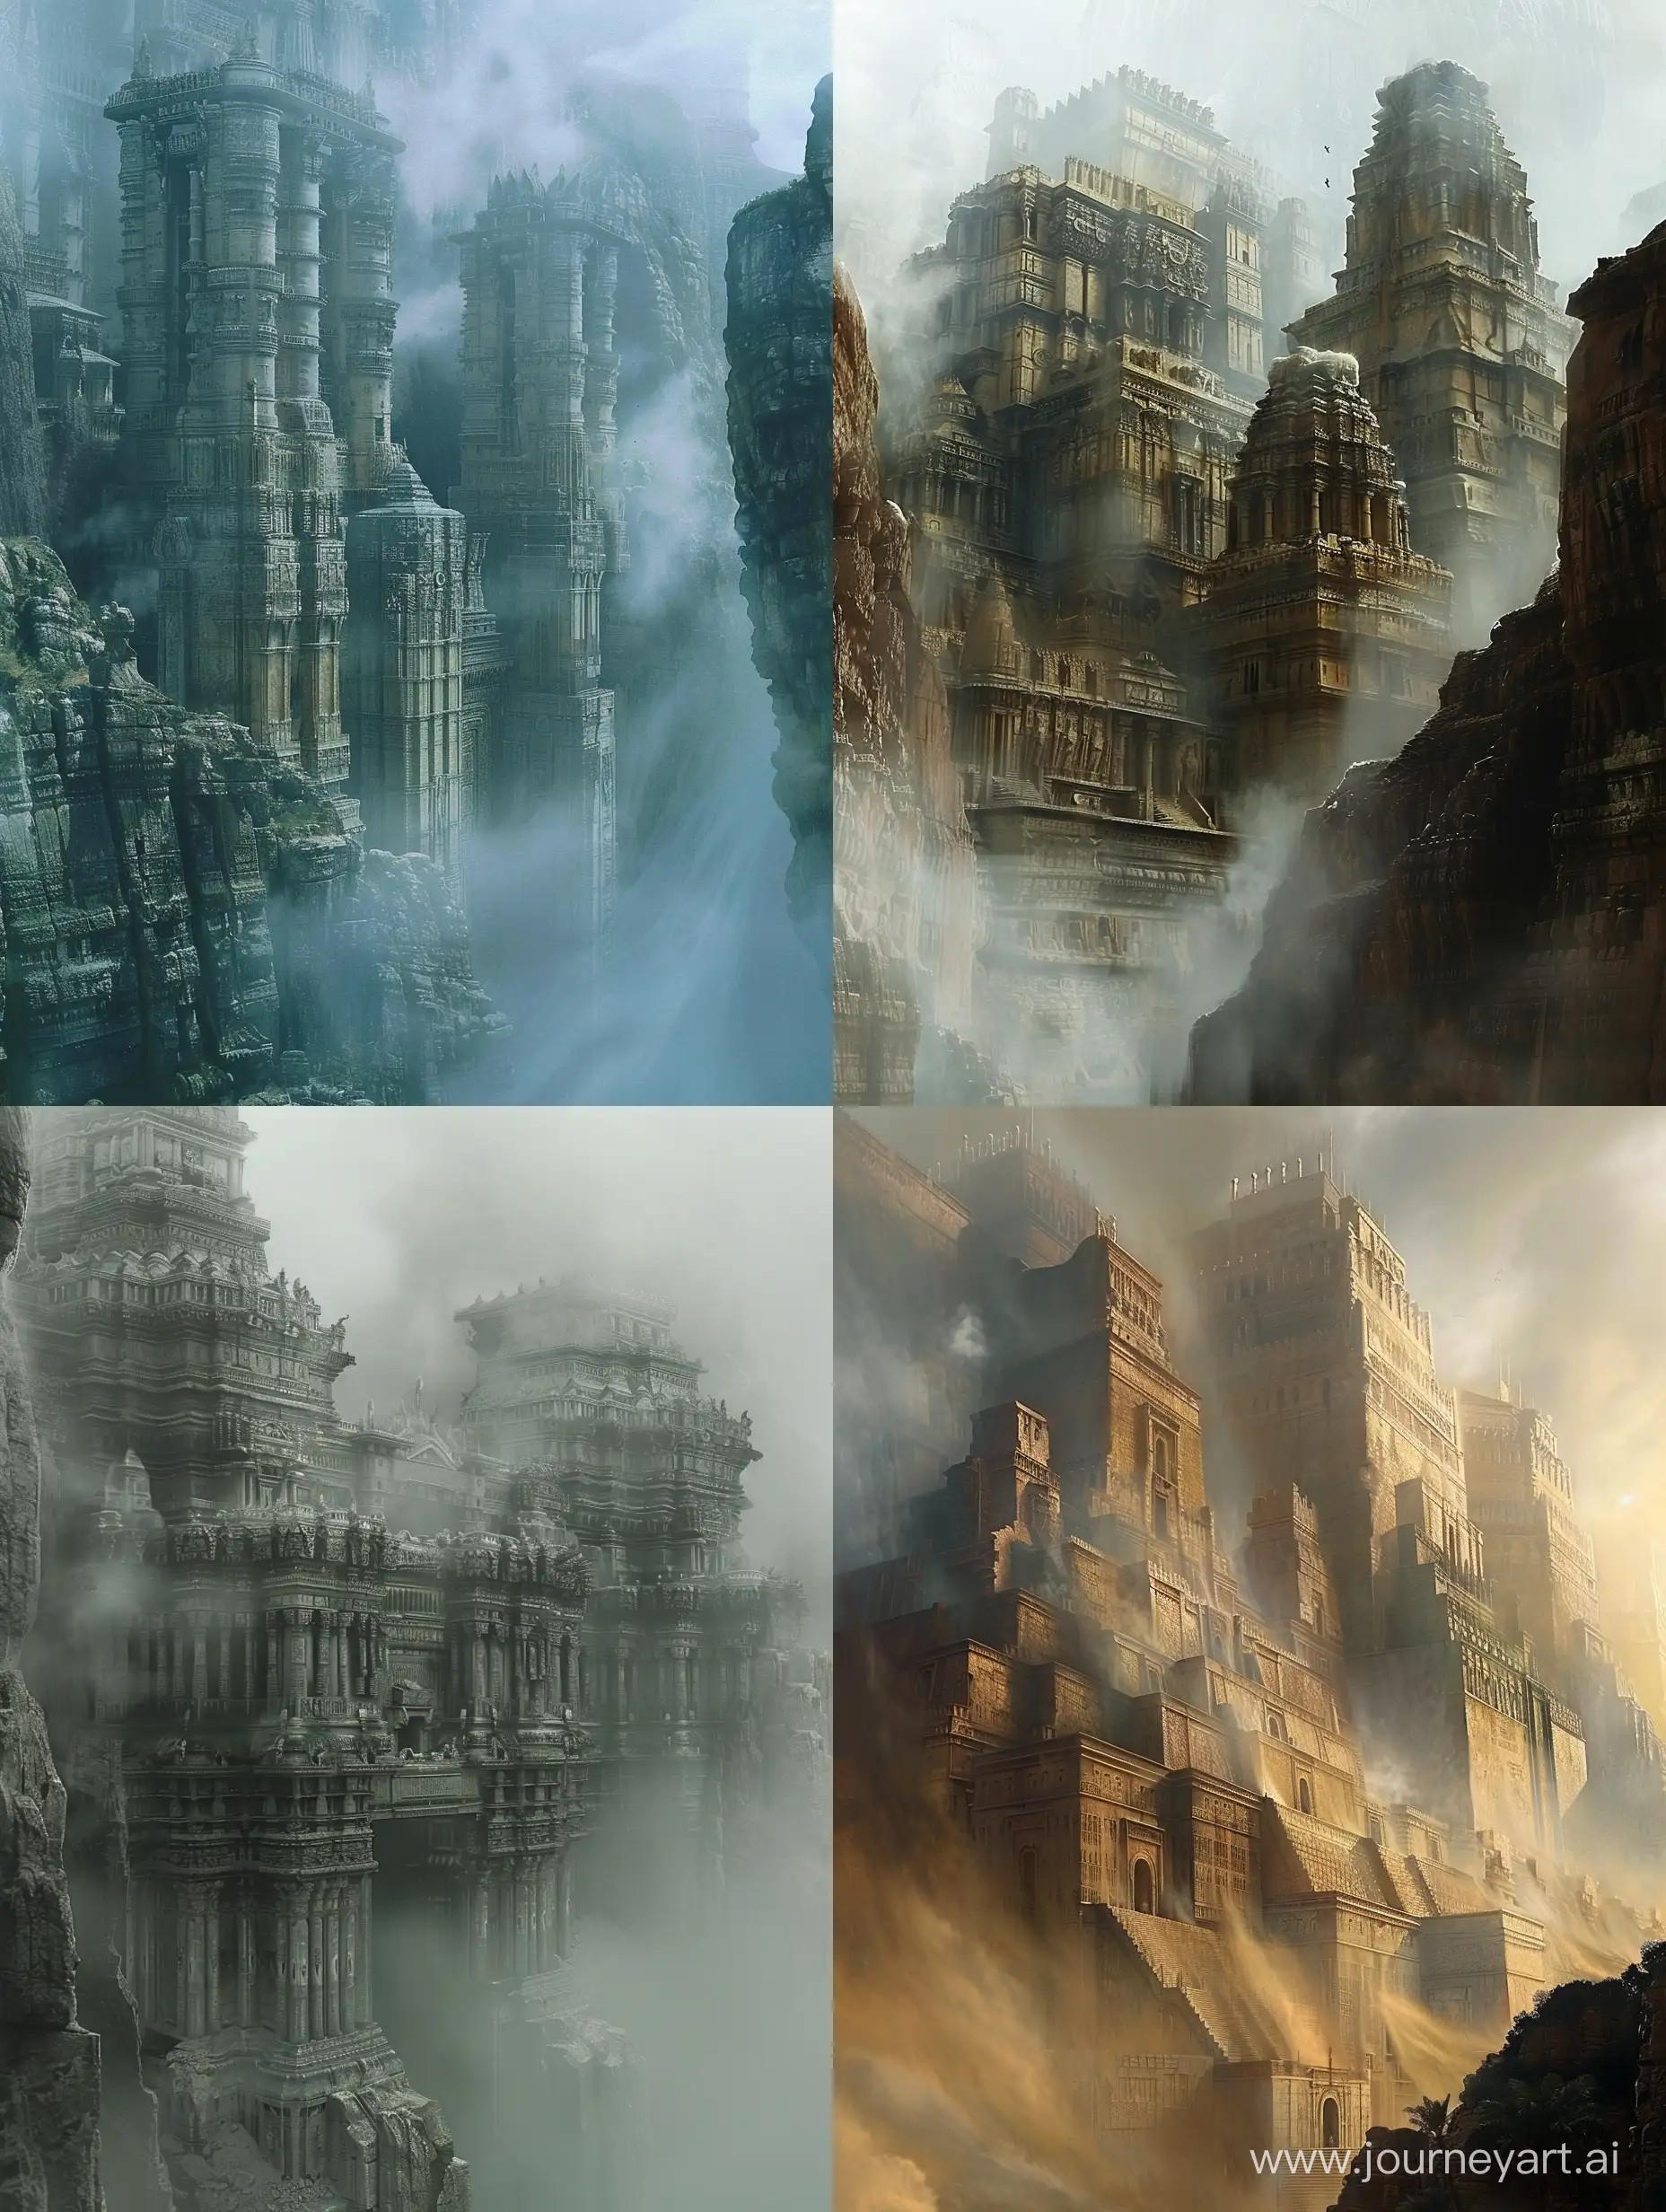 Fantasy-style world scenes, towering ancient buildings, shrouded in mist, mythology.